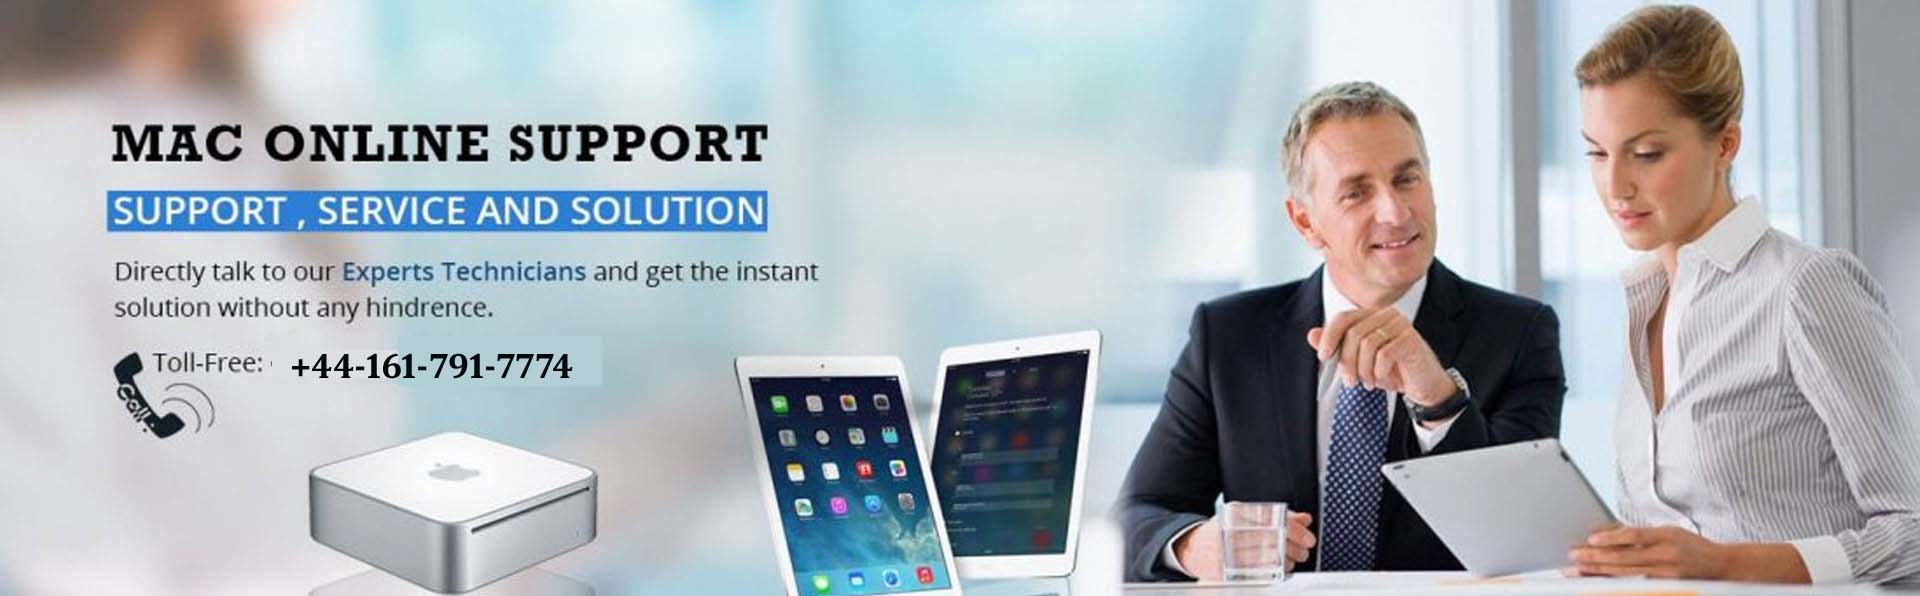 contact mac support uk